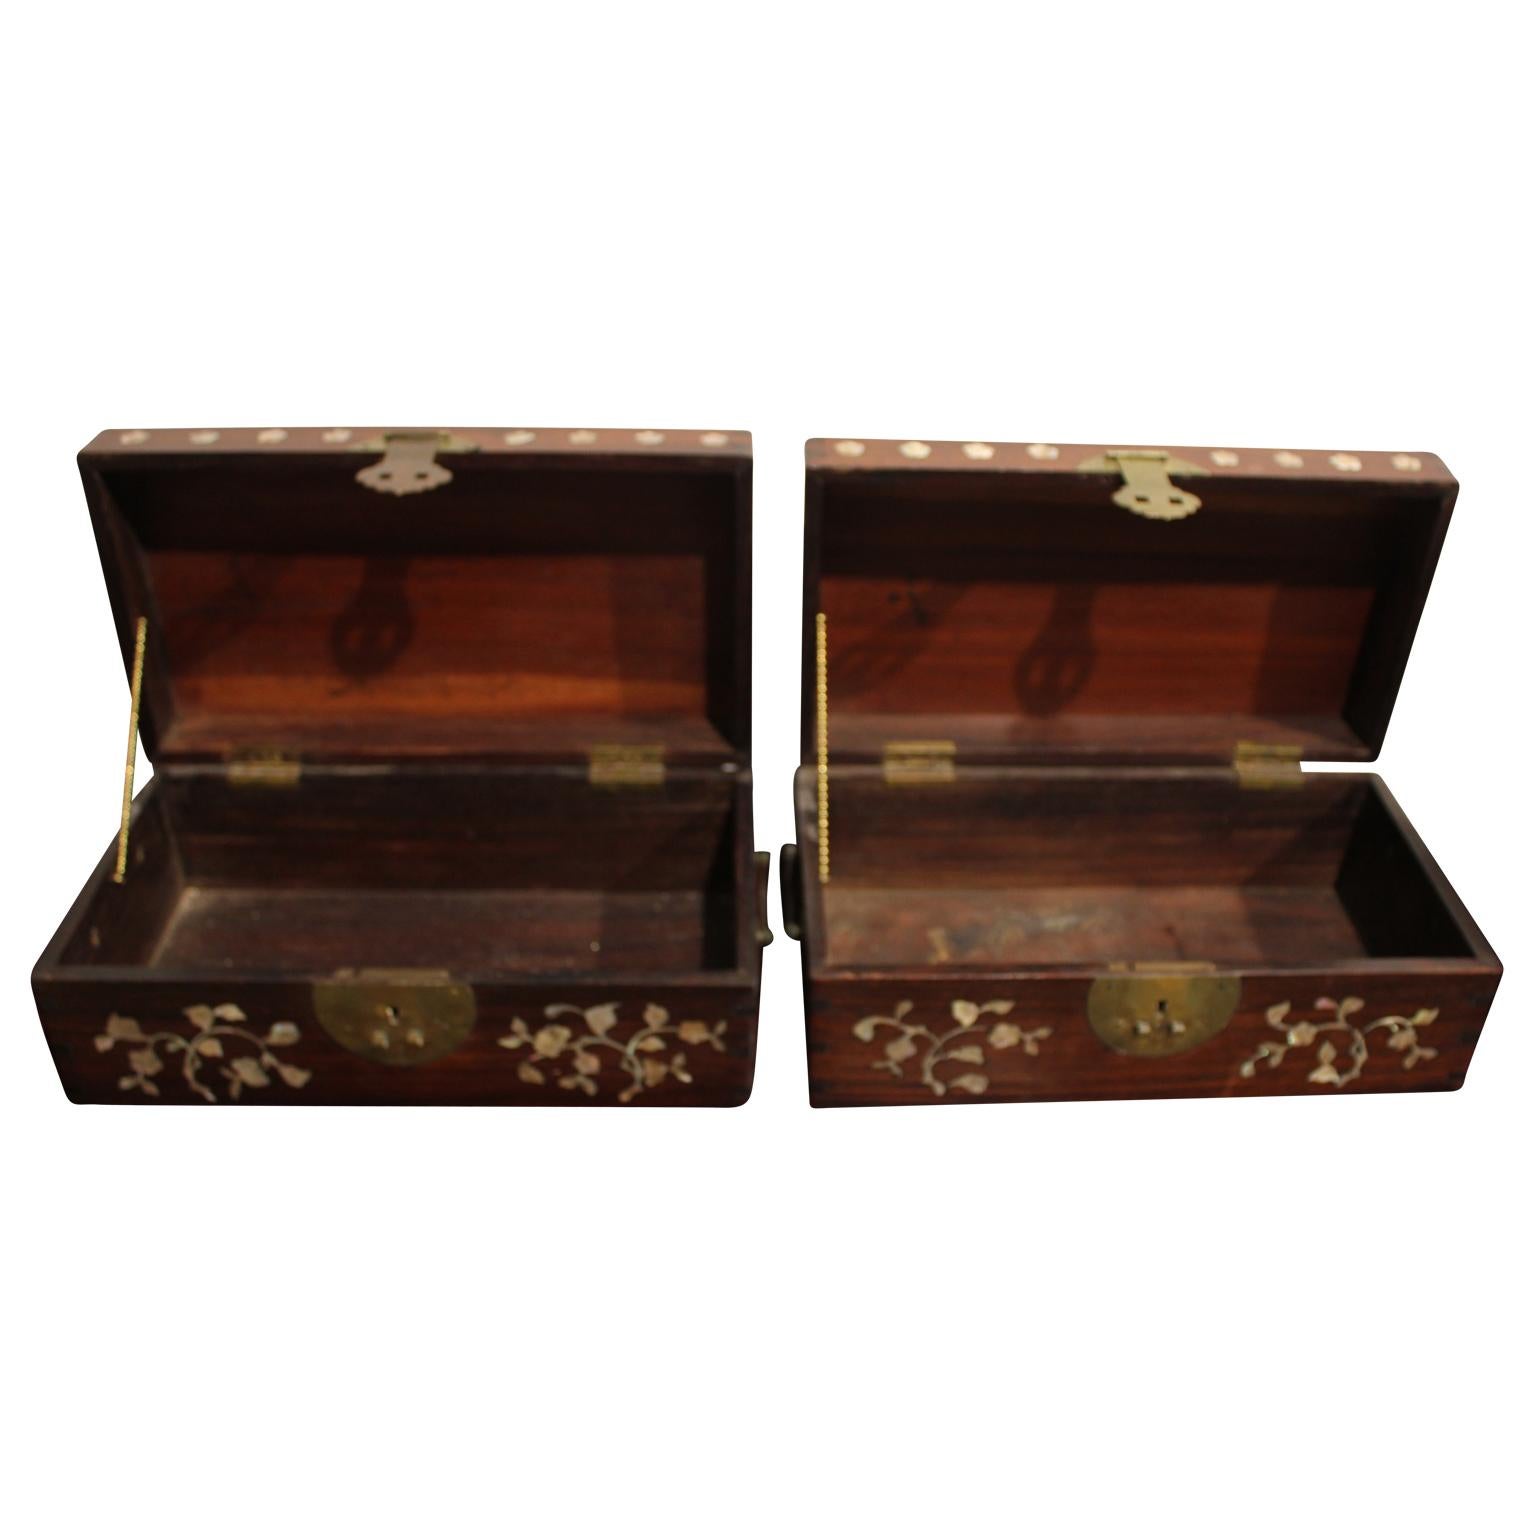 Pair of inlaid boxes with blossoms. The pair of boxes have the original slide locks. The symbol on the top of the box is similar to the Chinese and Japanese symbol of wealth and prosperity.
Dimensions are of one box.